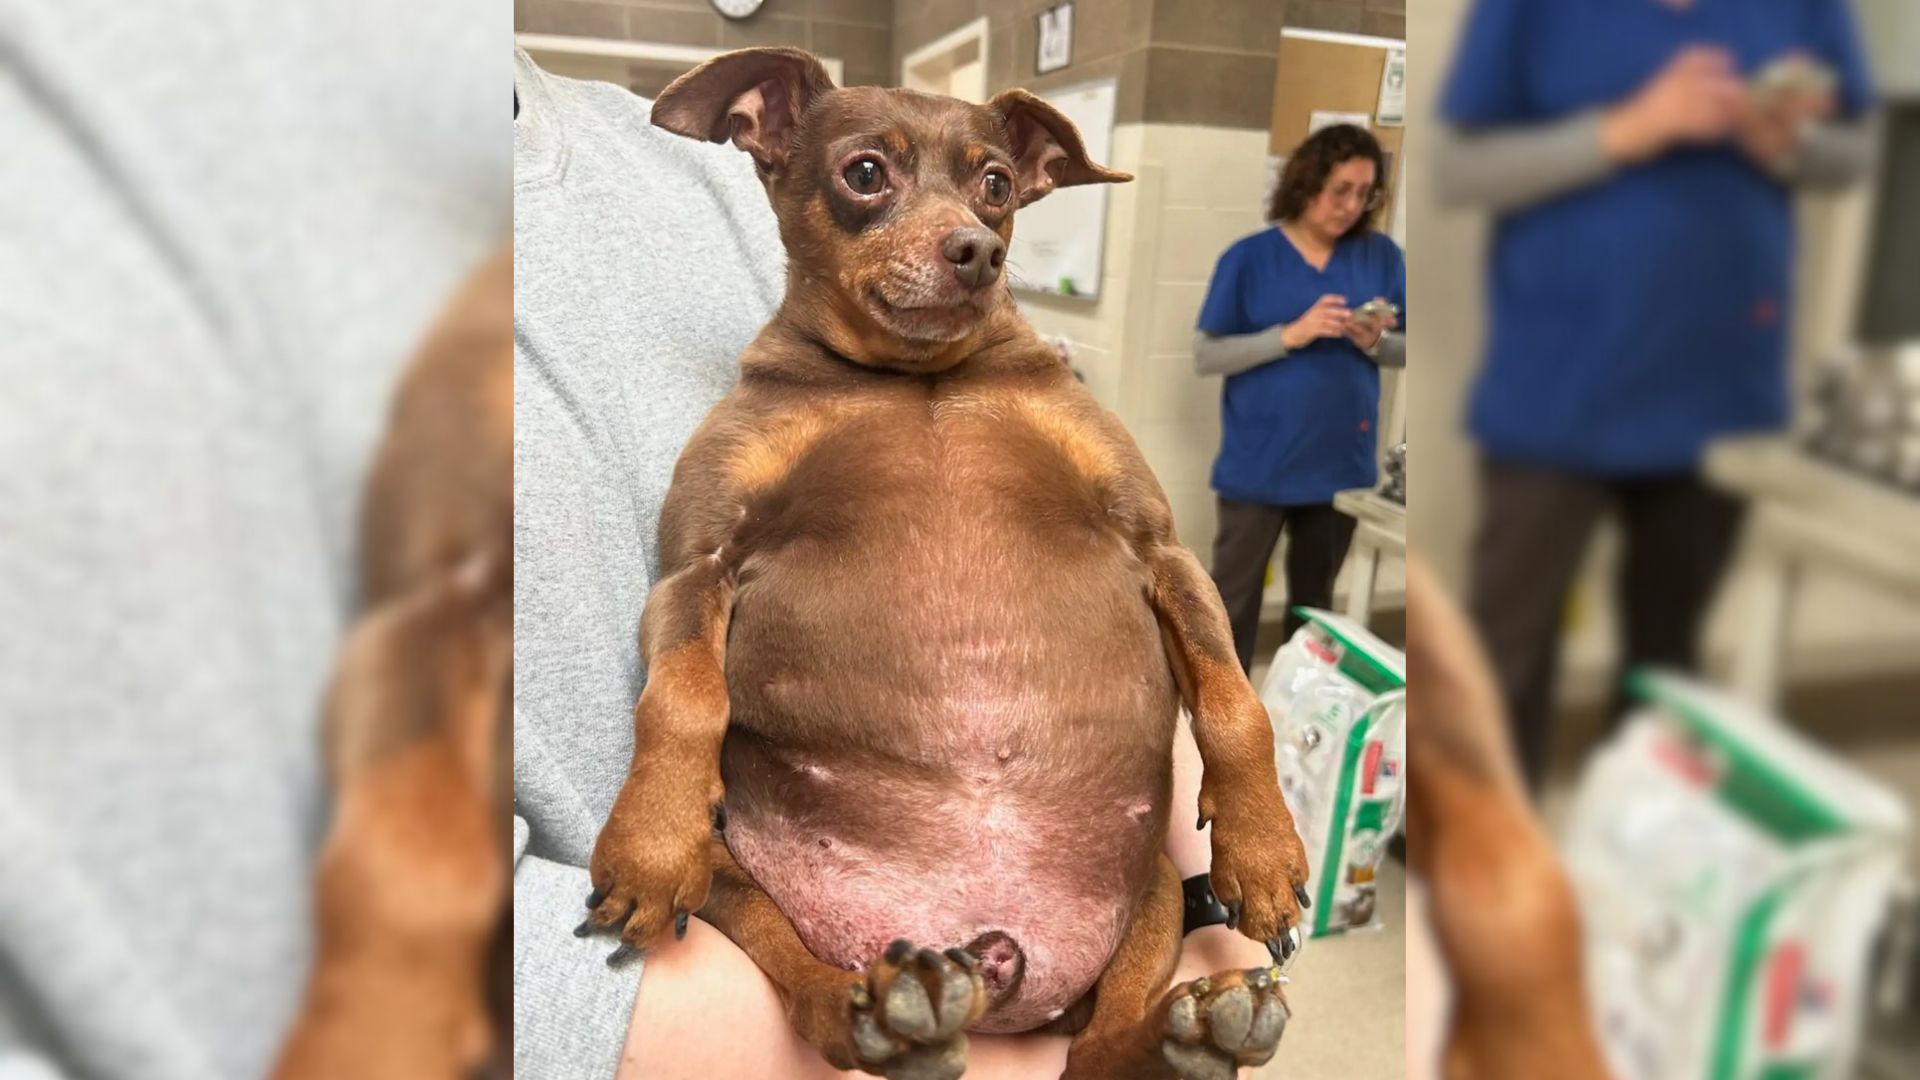 Rescuers Took In A Very Chubby Puppy Who Became A Celebrity In The Shelter For His Charming Personality